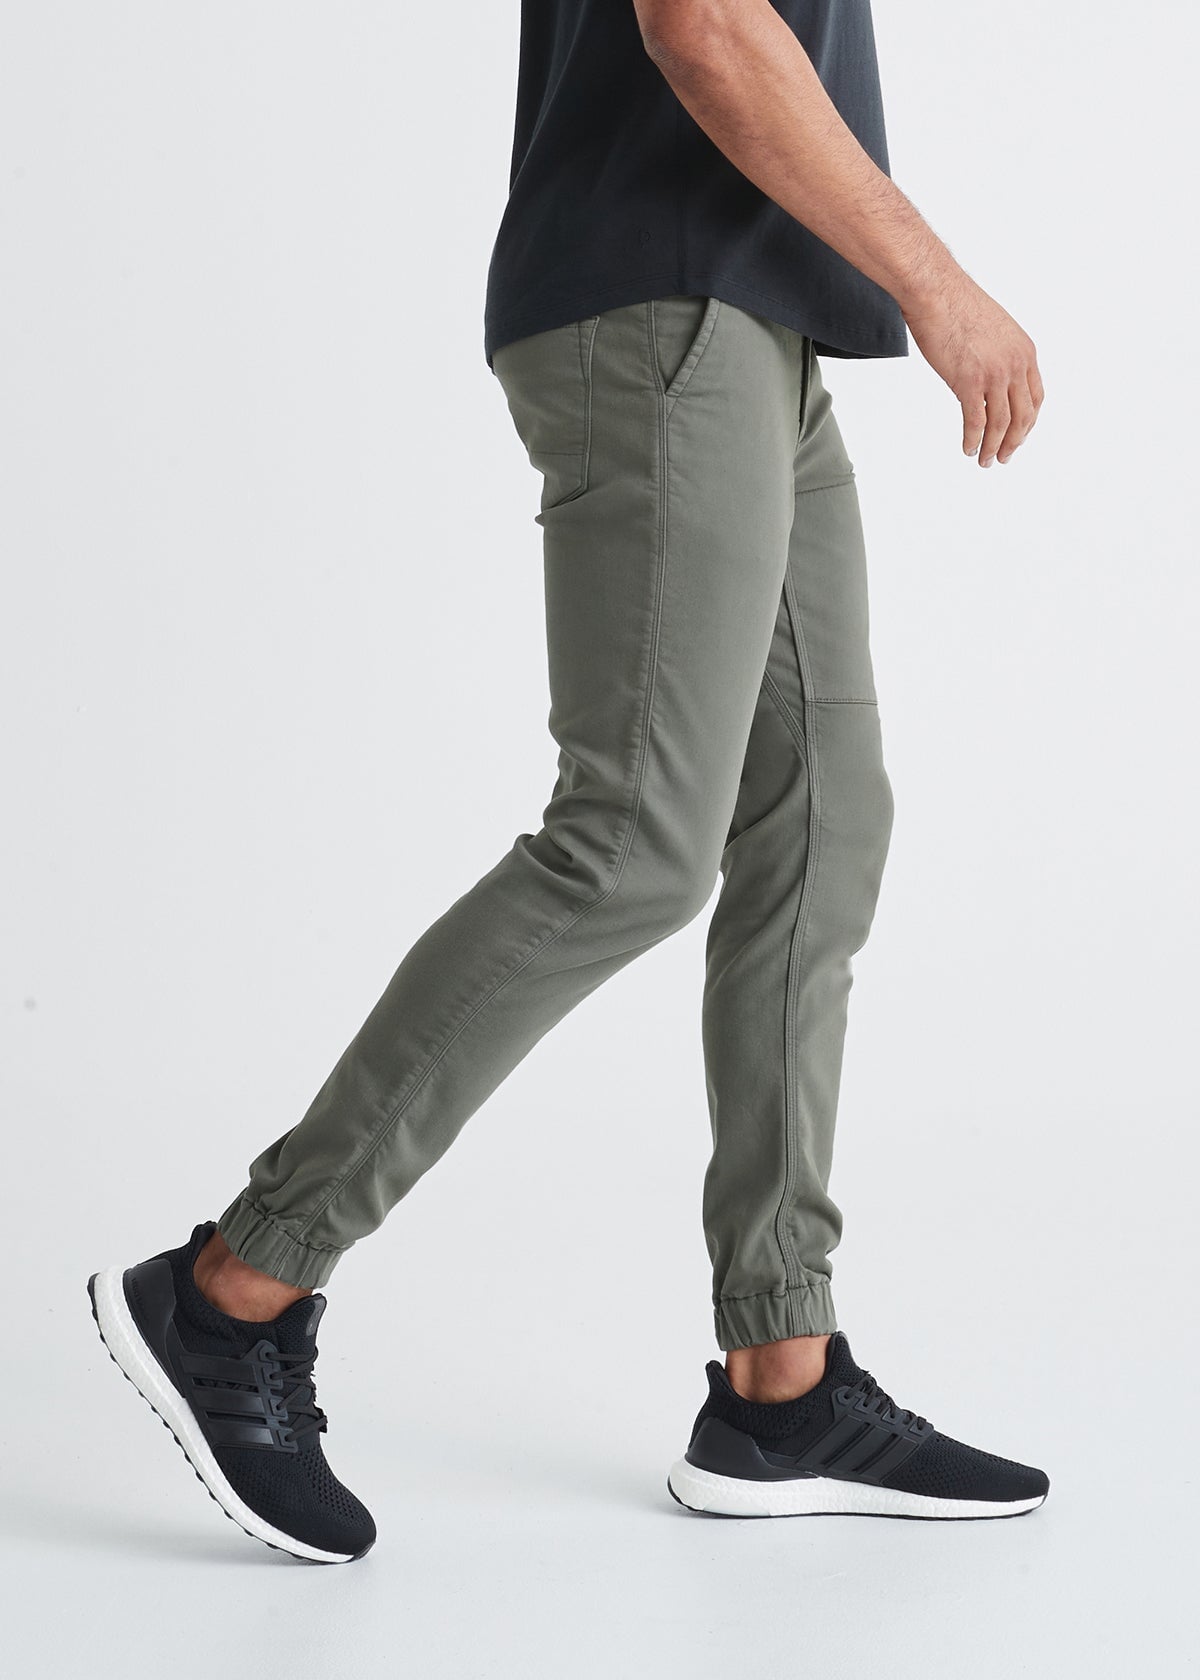 All In Motion: Woven Cargo Jogger Pants, Size Mens 2XL, Color Gray, NWT